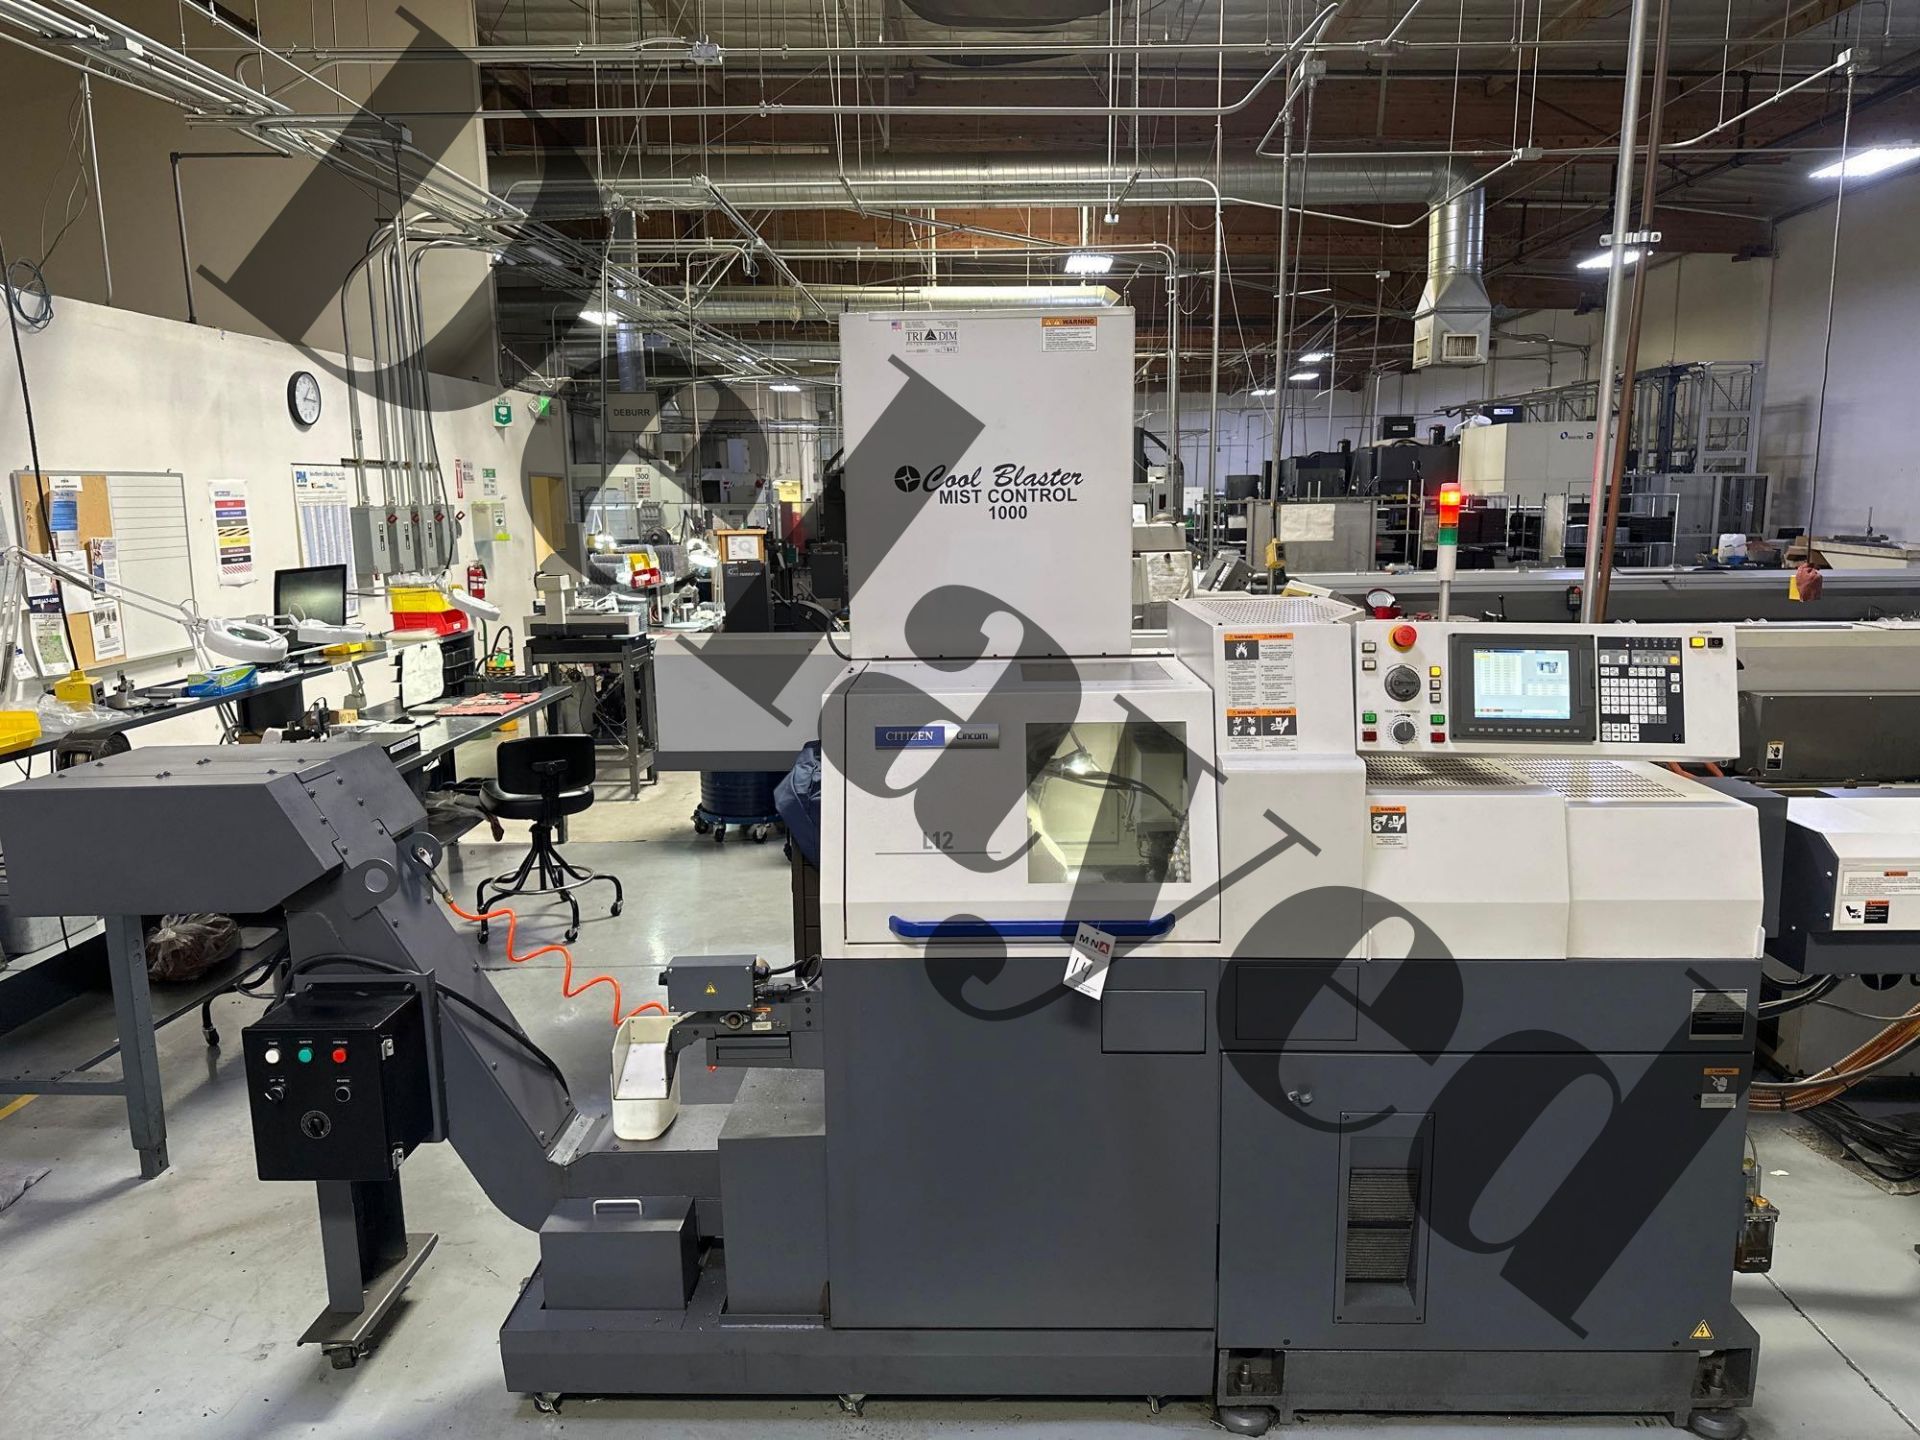 Citizen L12-1M7 6-Axis Swiss CNC Lathe, 18 Station Tool Holders *Delayed for sale in July*